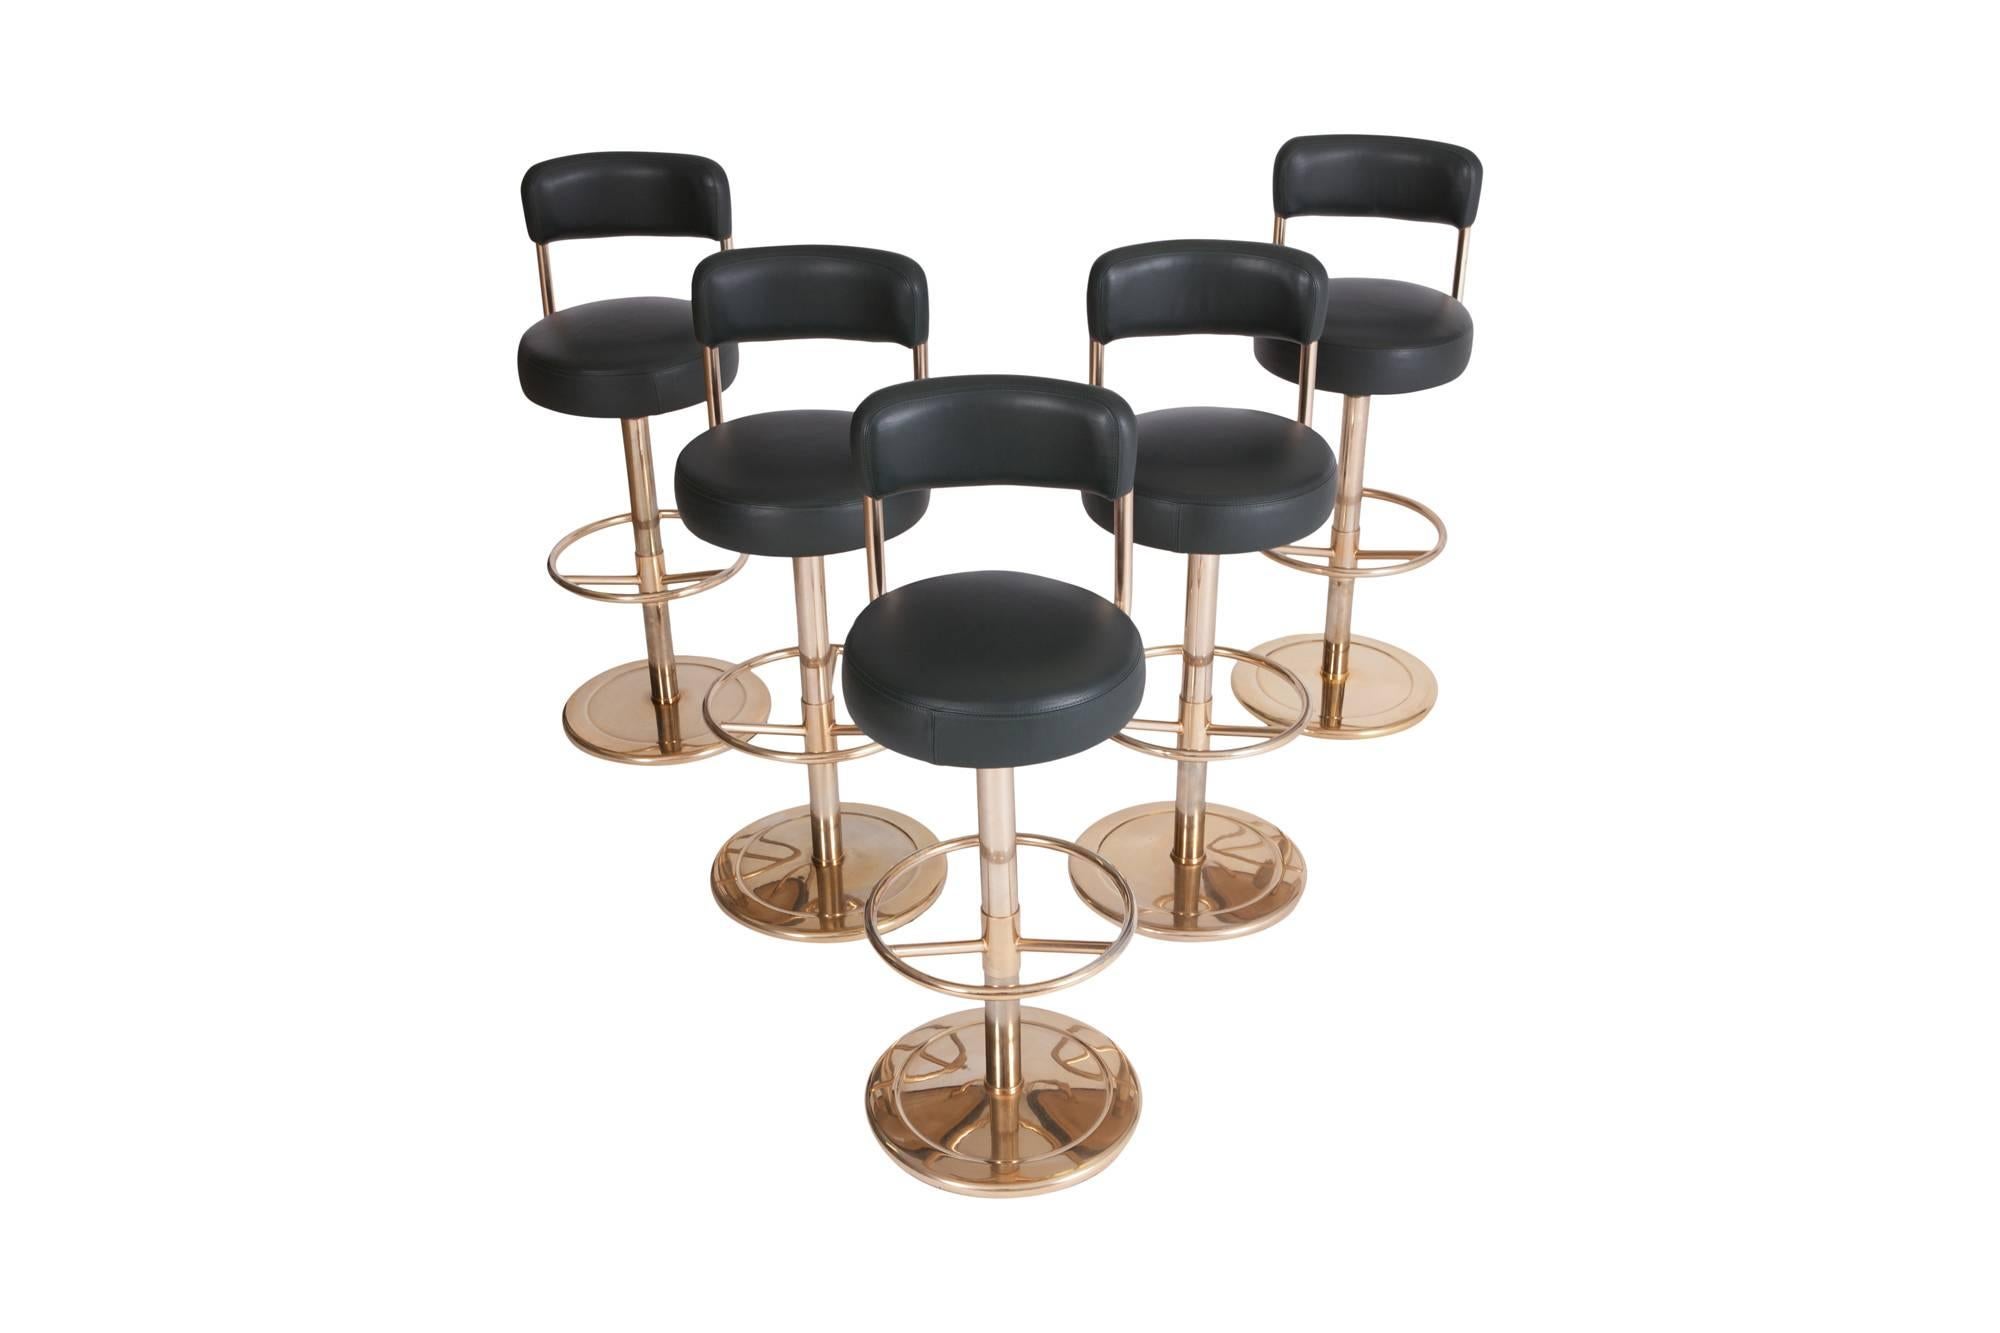 Gold-plated and Green leather “Jupiter” barstools, designed by Börge Johansson, produced by Johansson design in Markaryd, Sweden, 1970s. This set of five stools have a very rich appearance due the combination of a gold coloured base and deep